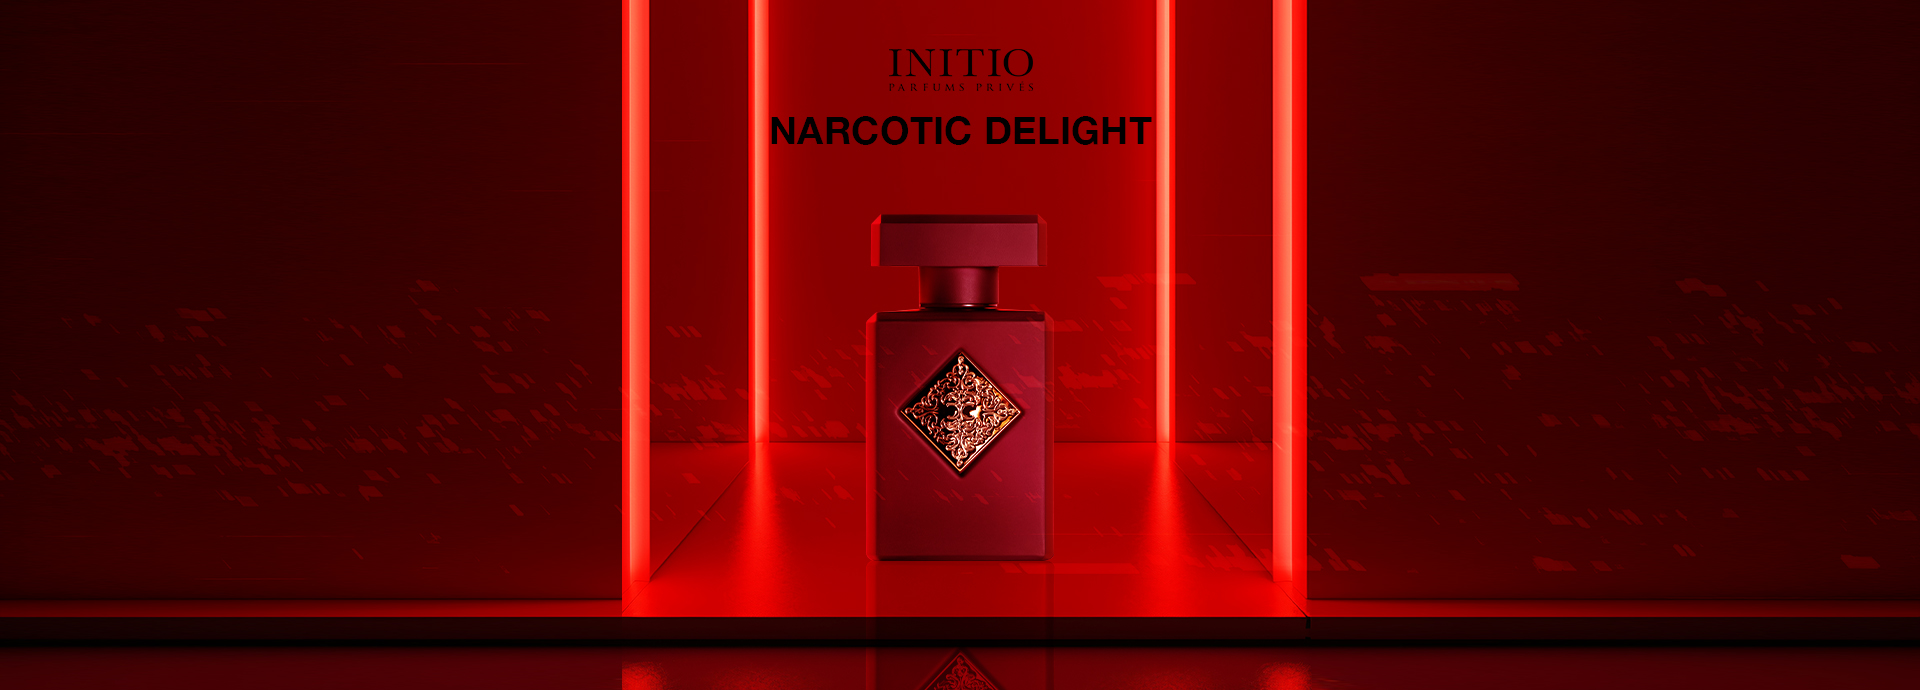 Initio Narcotic Delight EDP